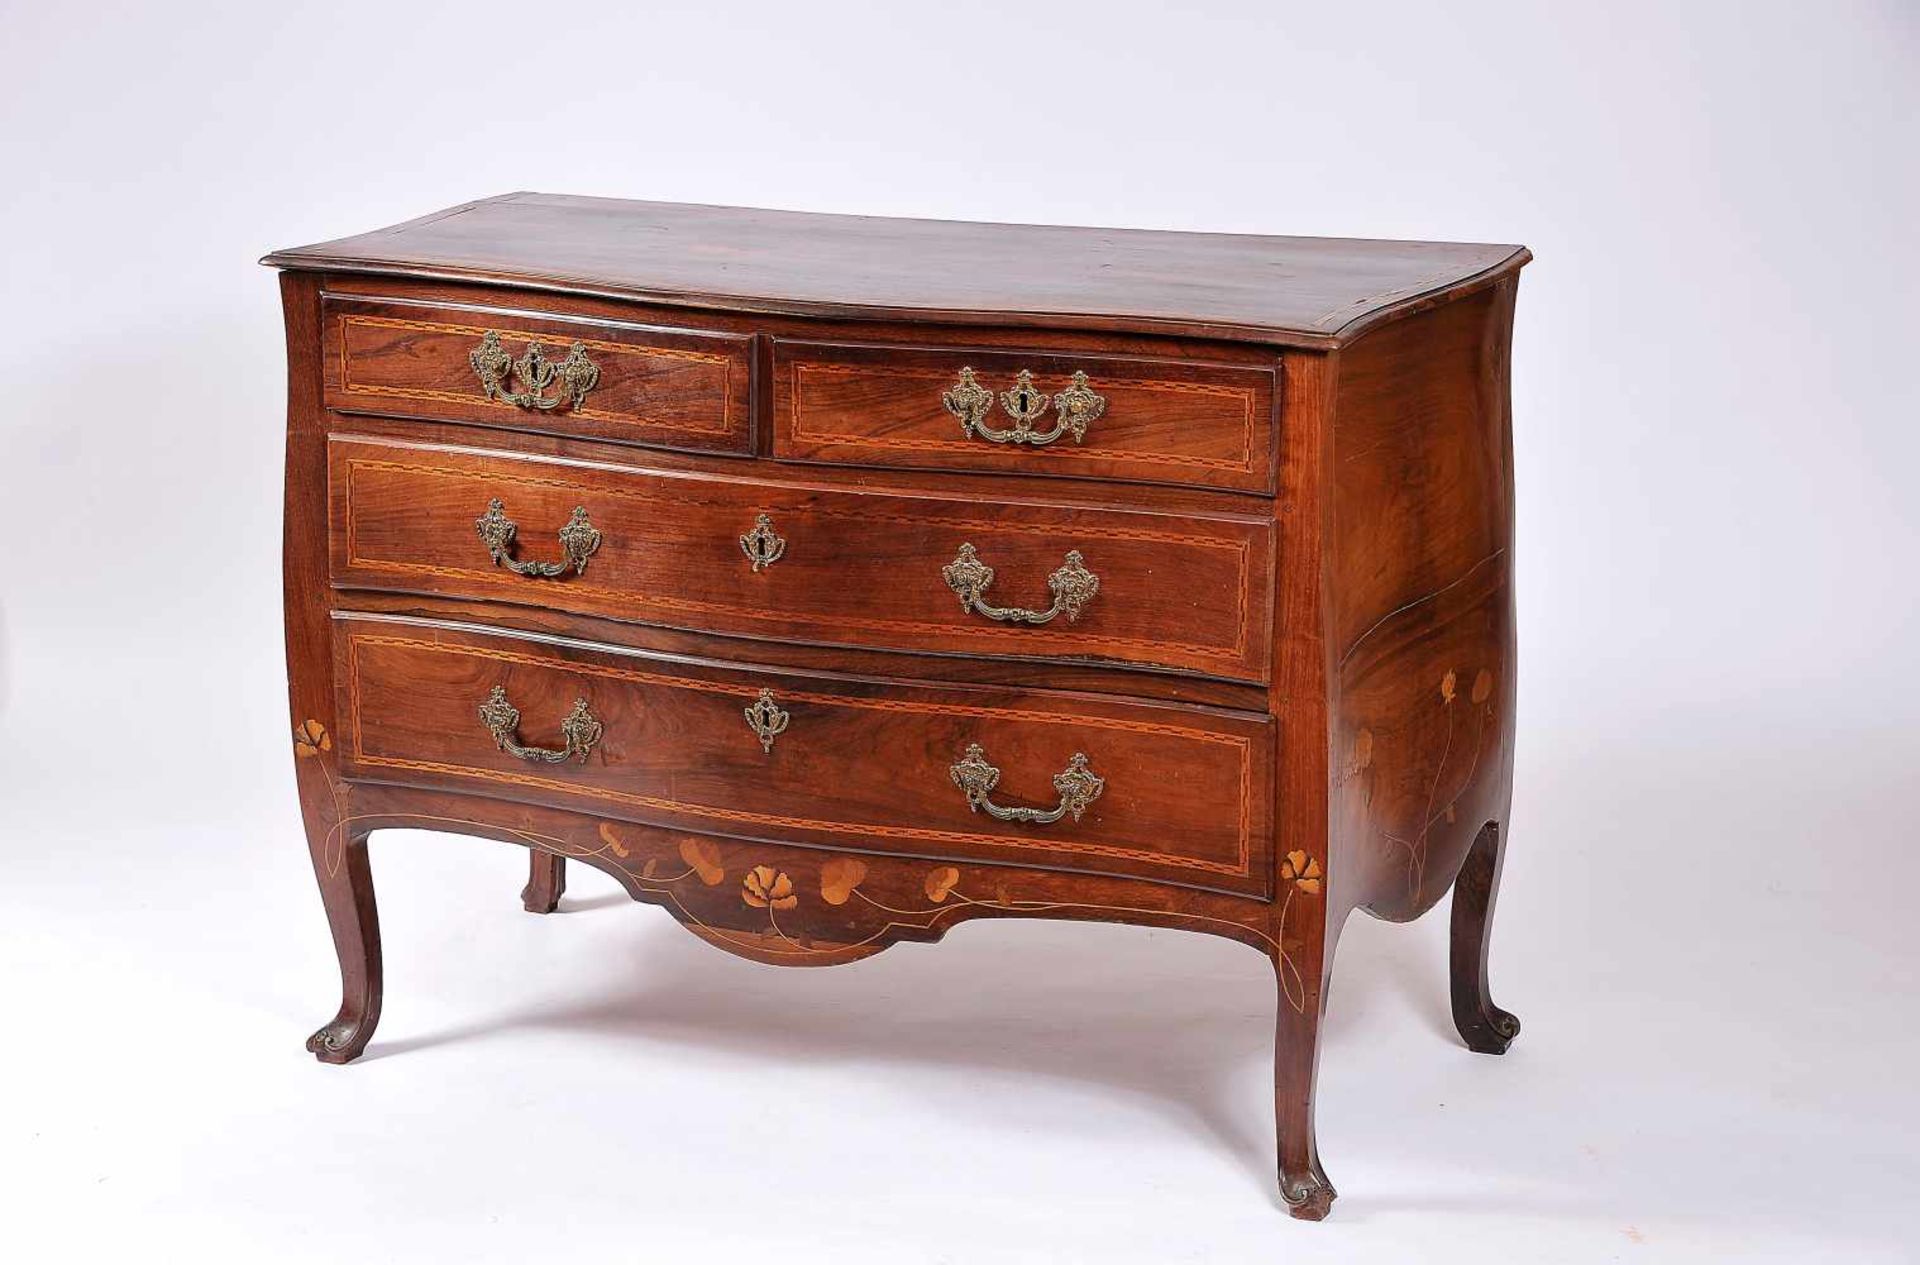 A Commode, D. José I, King of Portugal (1750-1777), carved Brazilian rosewood feet, thornbush and